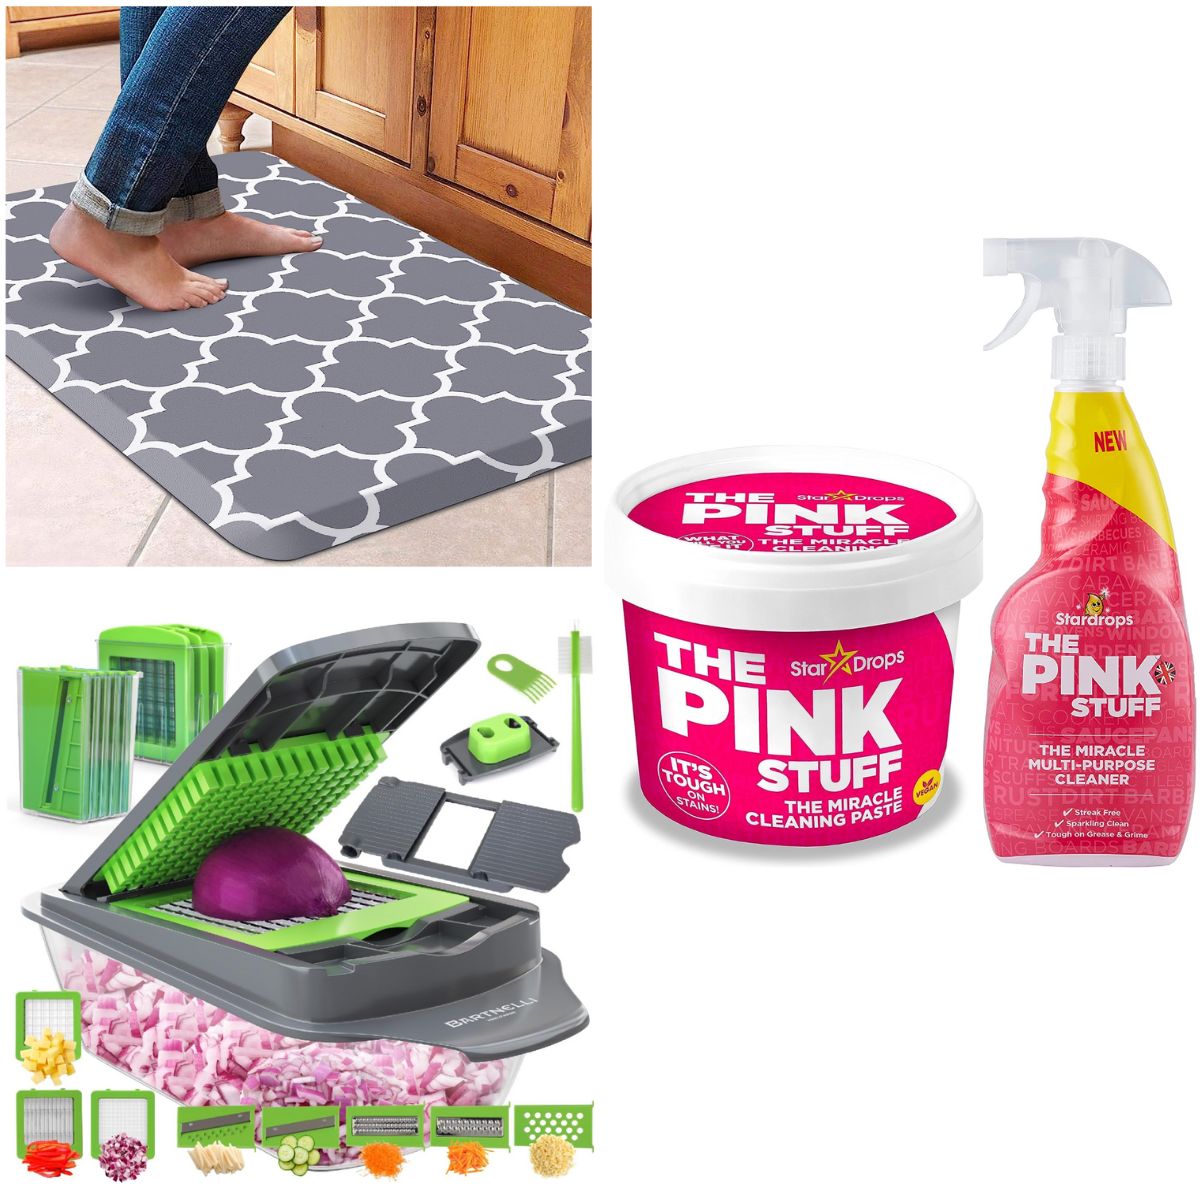 The Pink stuff cleaning paste / spray $4+